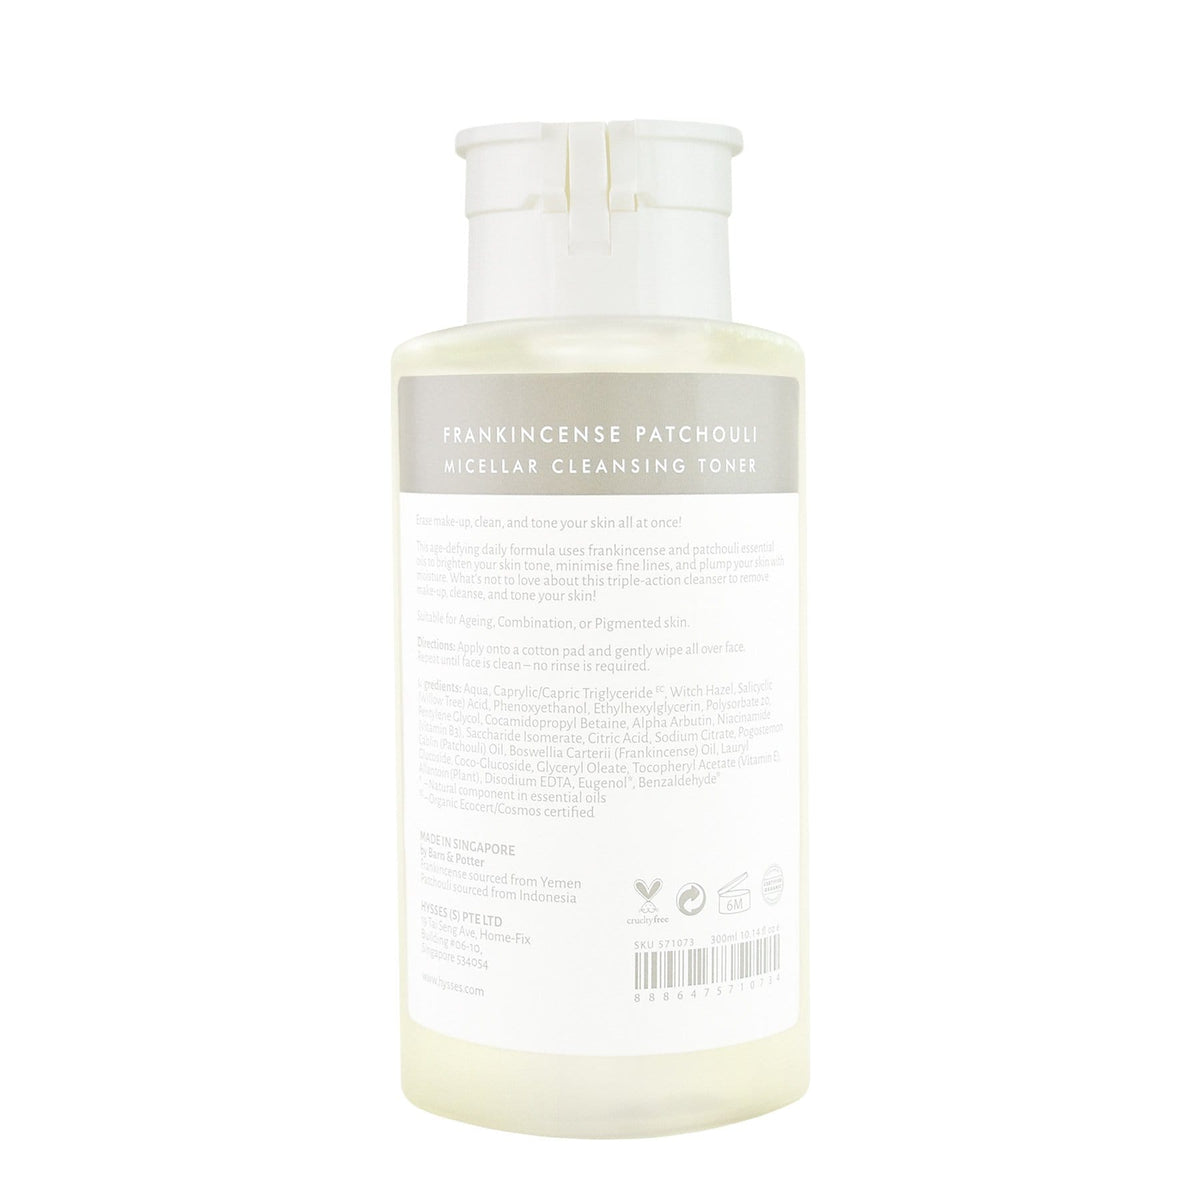 Hysses Face Care Micellar Cleansing Toner Frankincense Patchouli @RM95.92